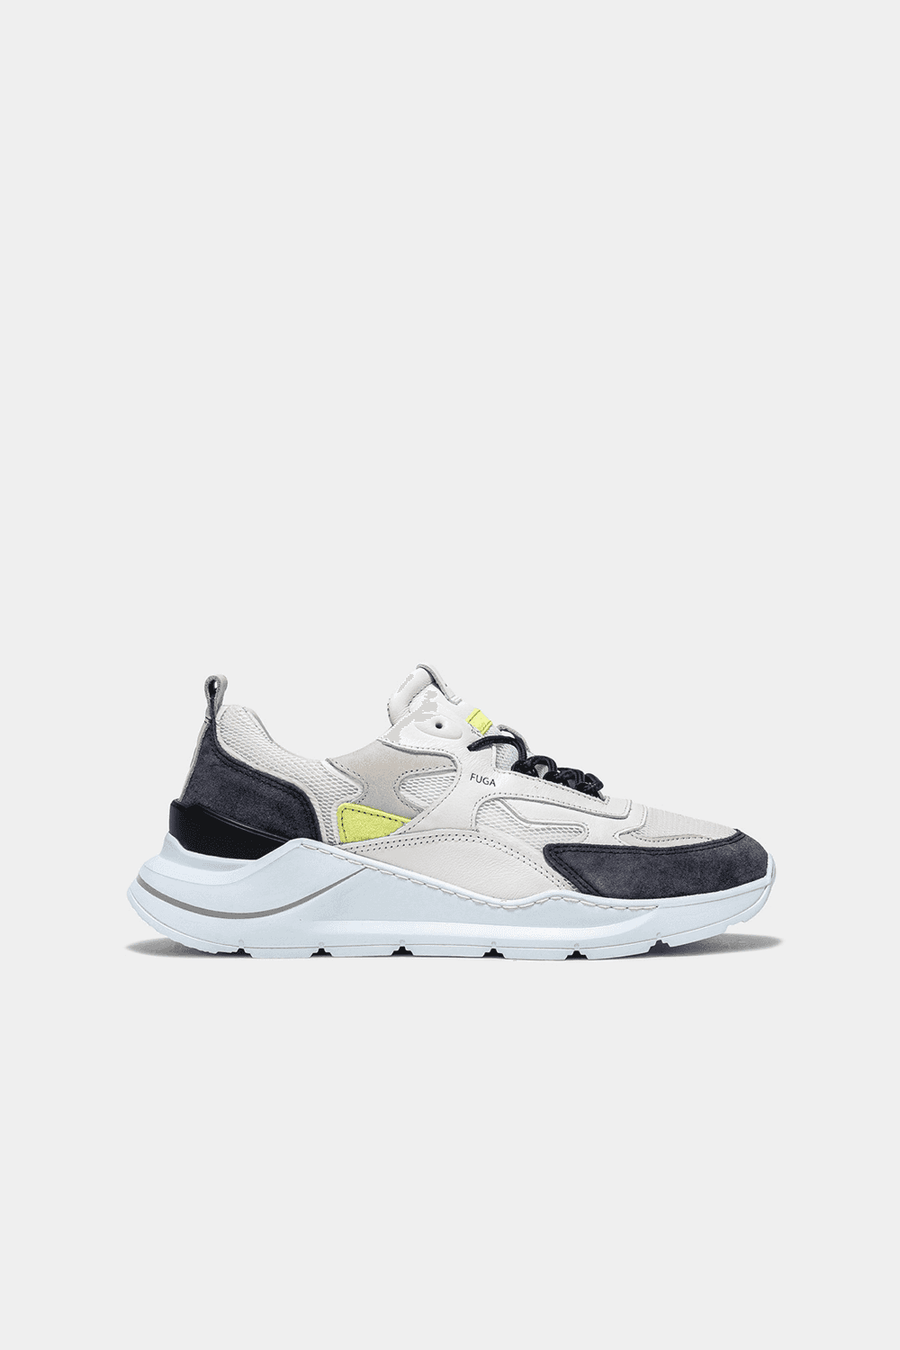 Buy the D.A.T.E. Fuga 2.0 Colored Sneaker in White at Intro. Spend £50 for free UK delivery. Official stockists. We ship worldwide.